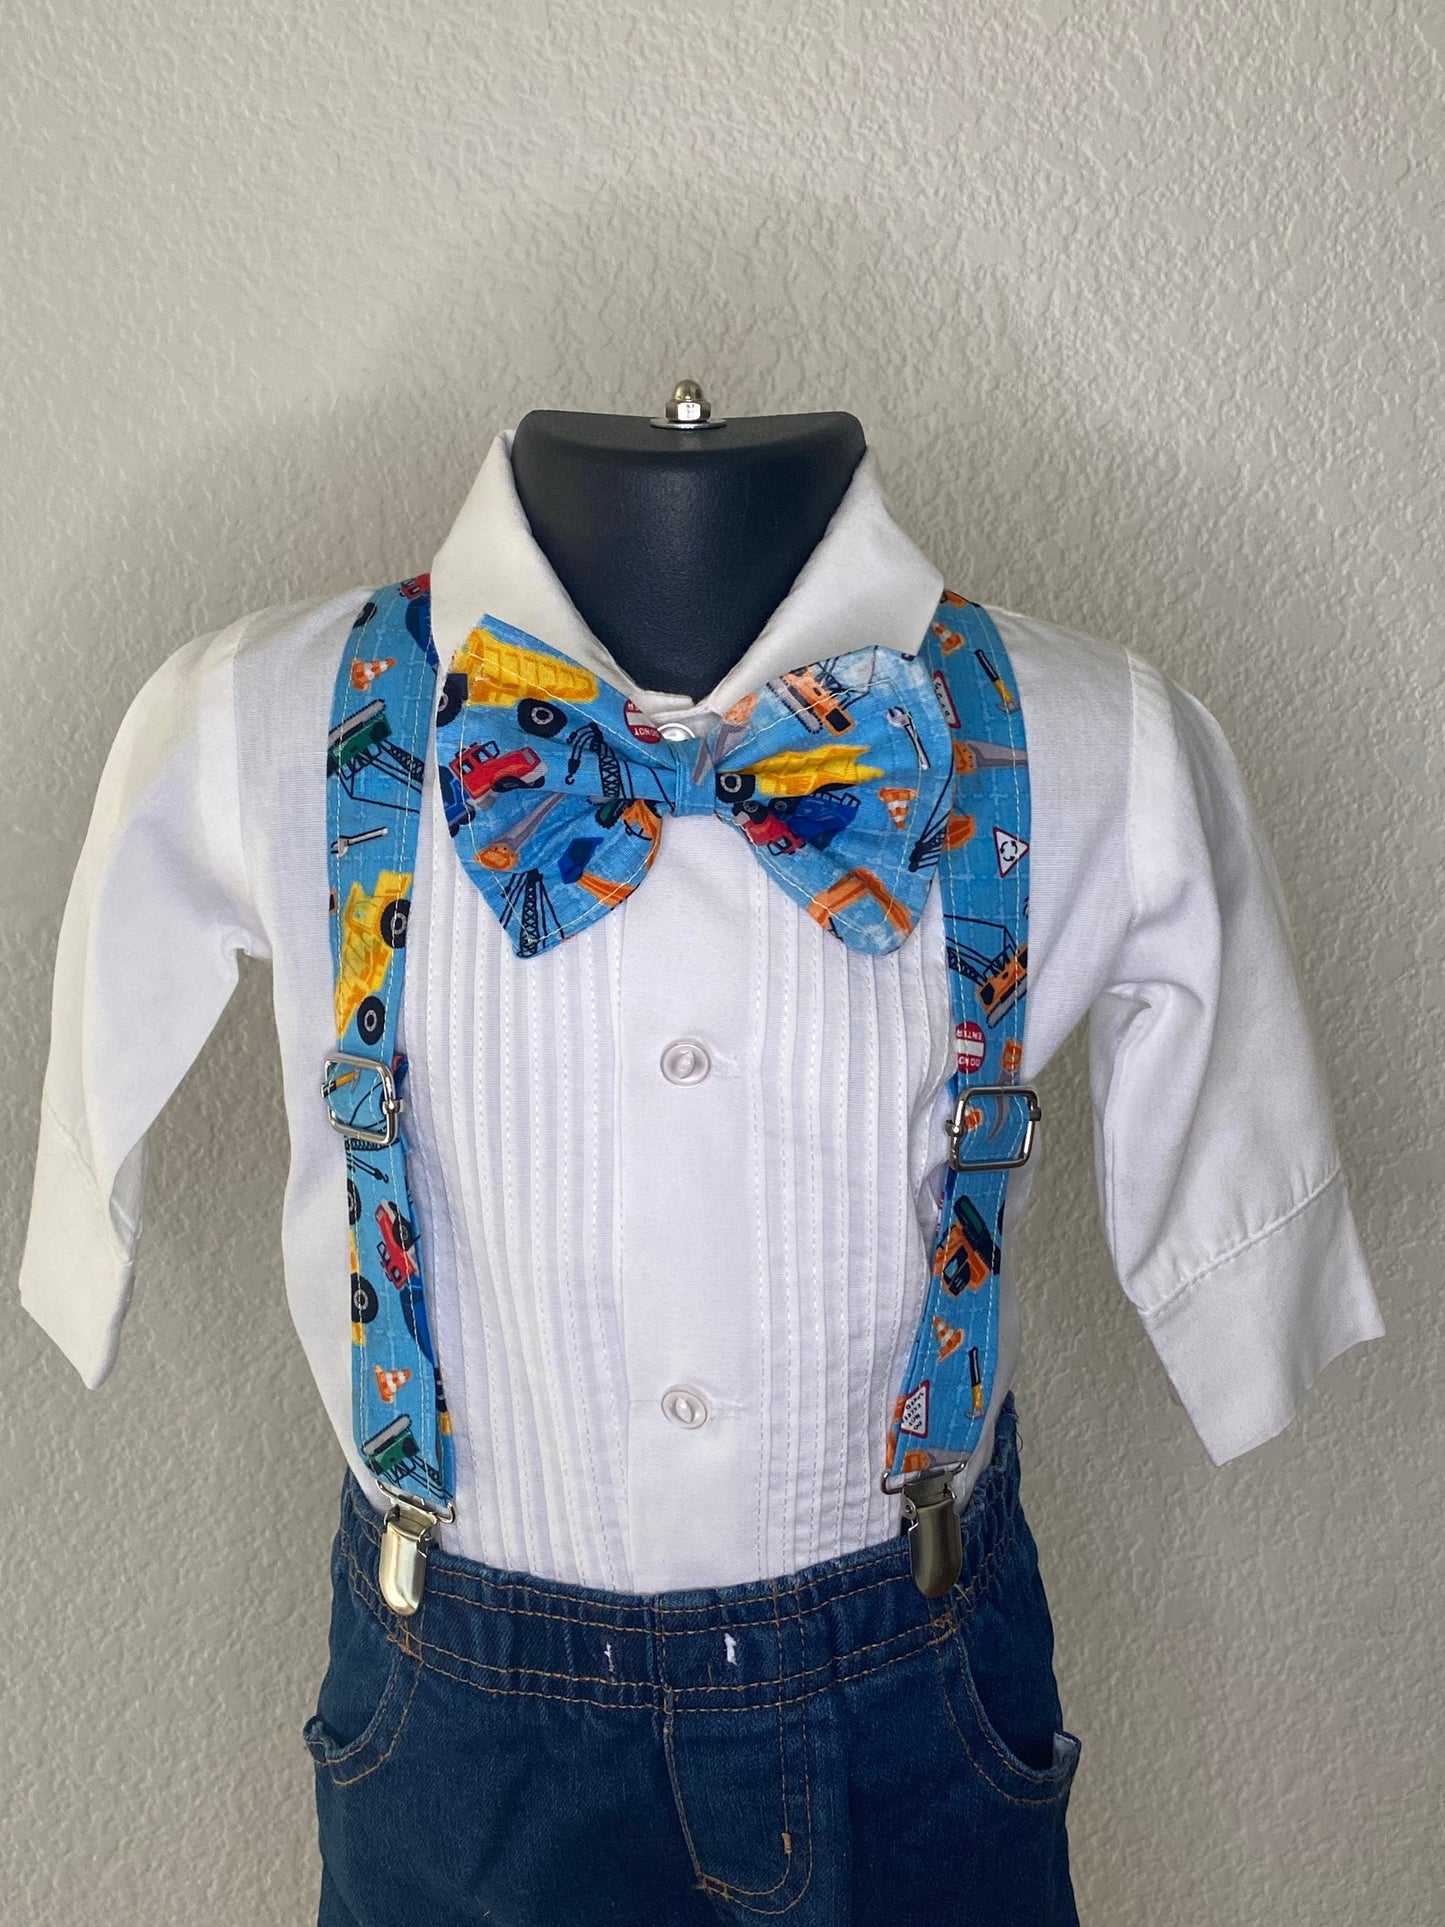 First Birthday Smash Cake Outfit Custom Construction Suspenders Bow tie applique shirt diaper cover nappy party gift dump truck bloomer